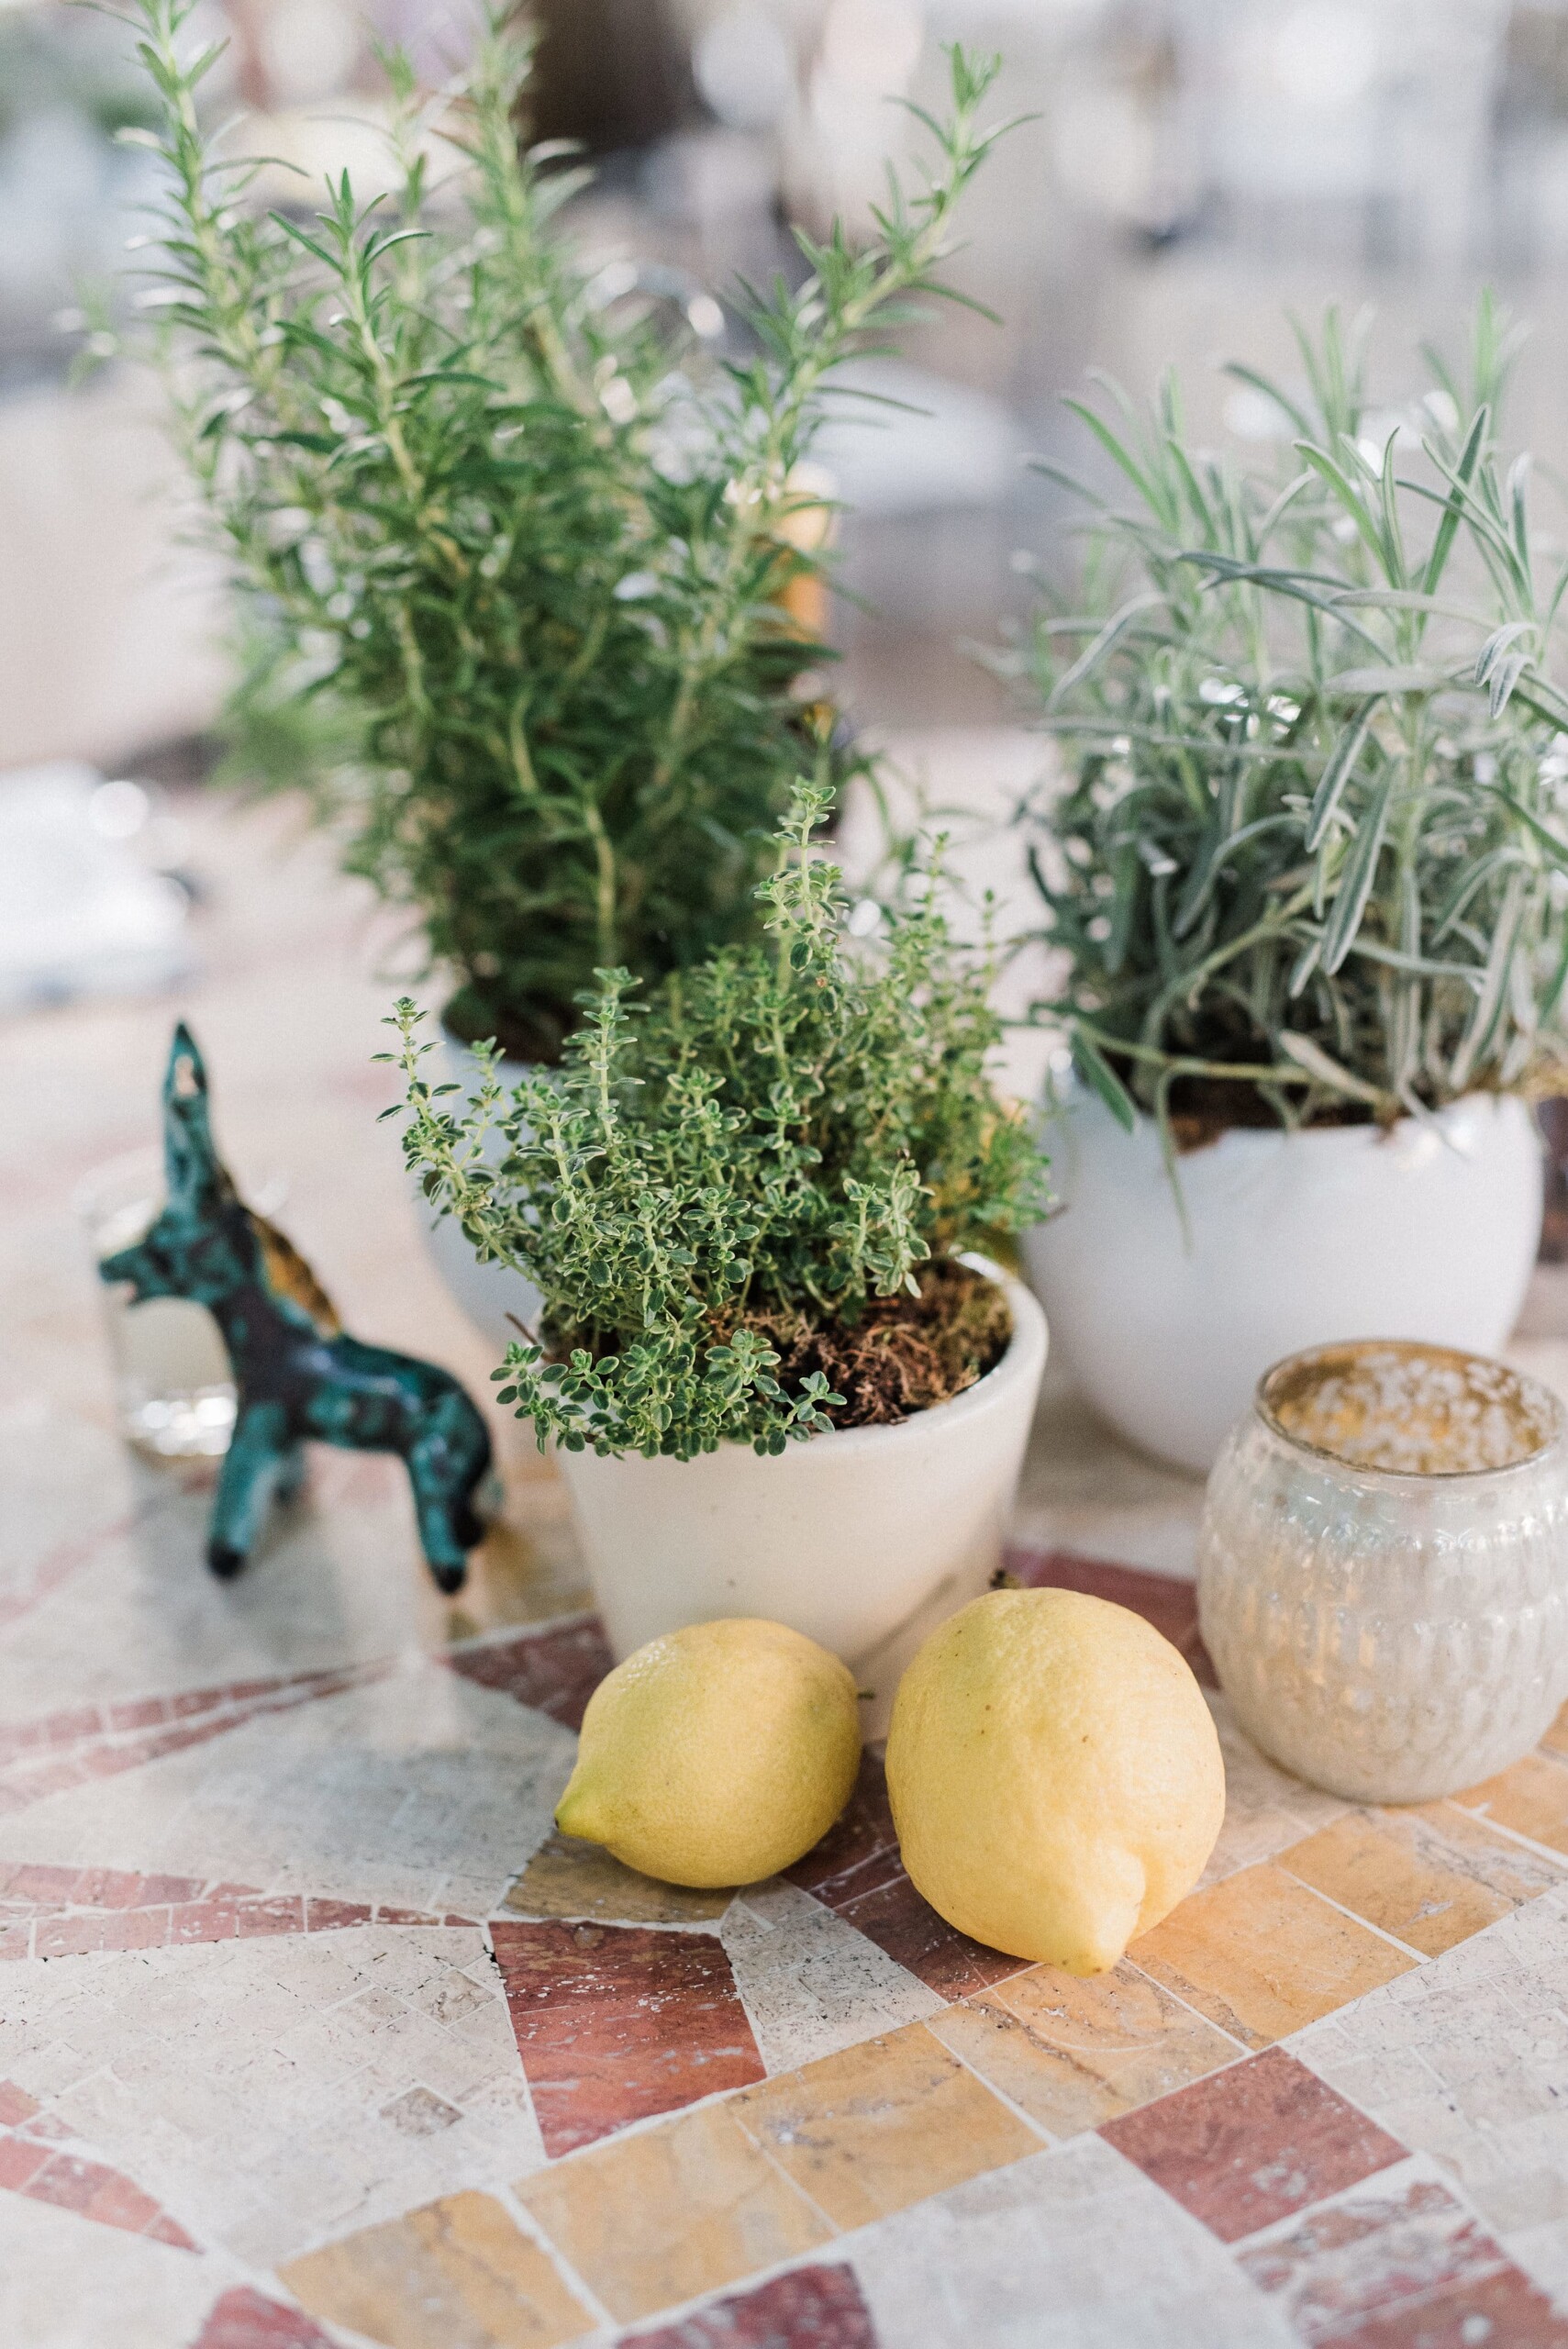 Table decor with lemons and herbs